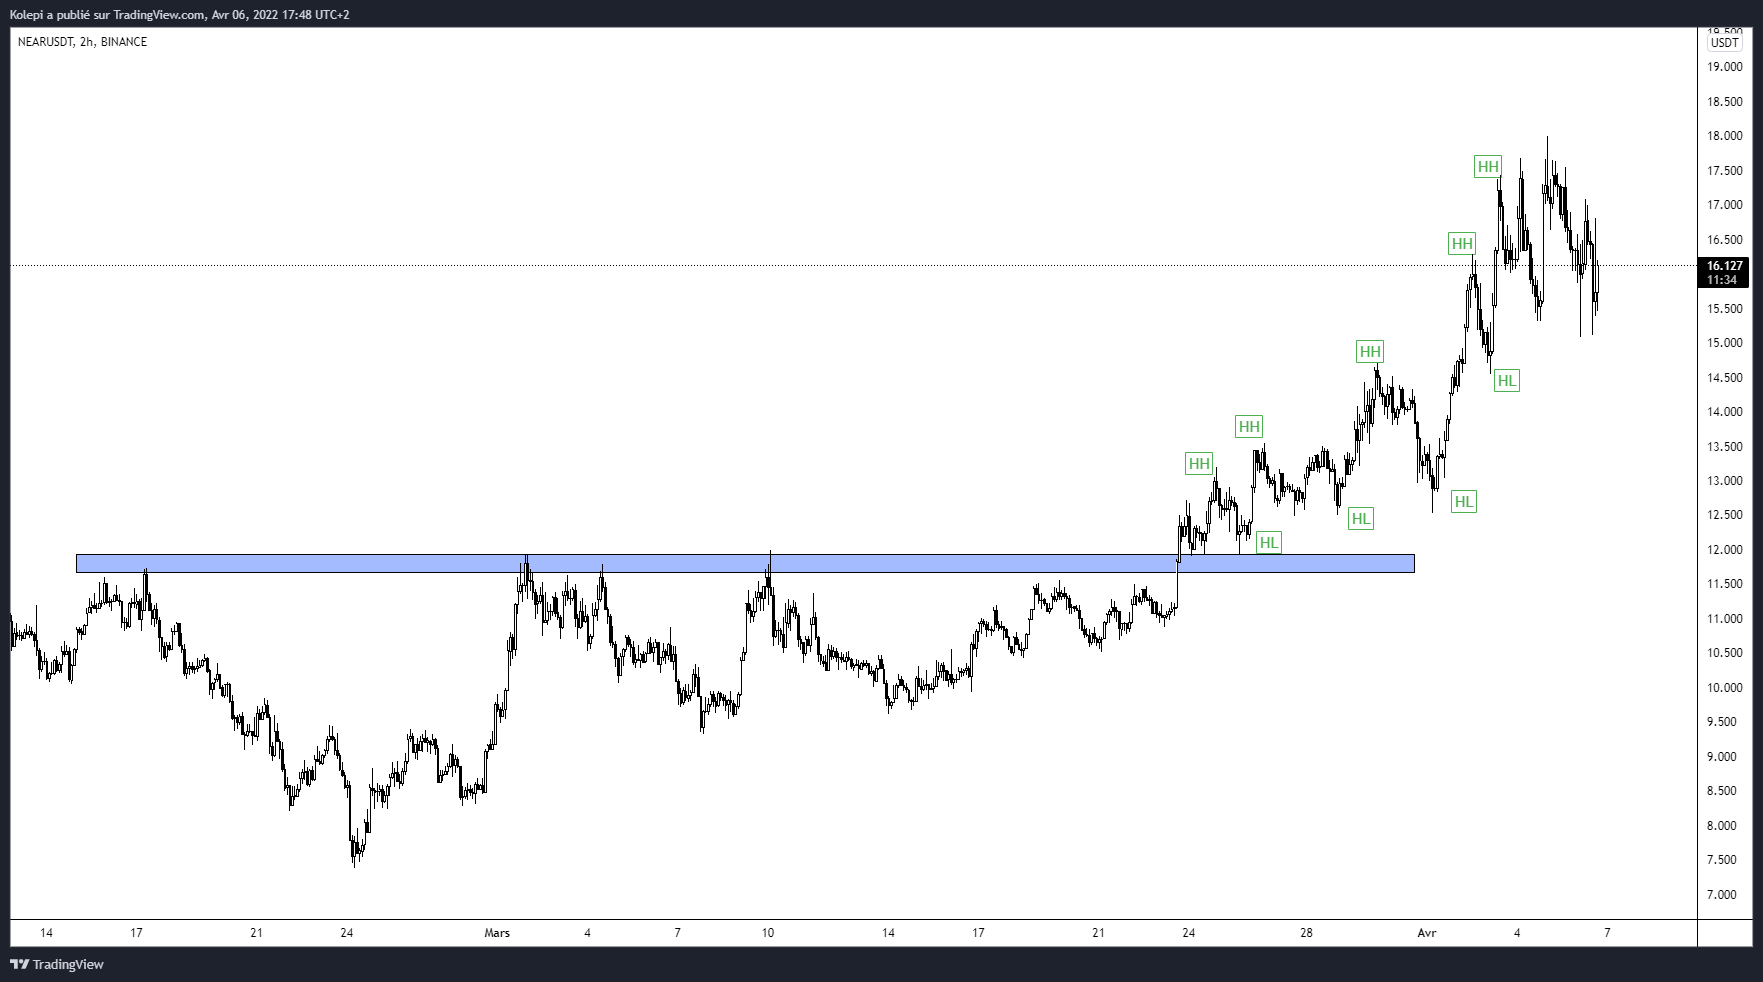 NEAR in daily, established trend